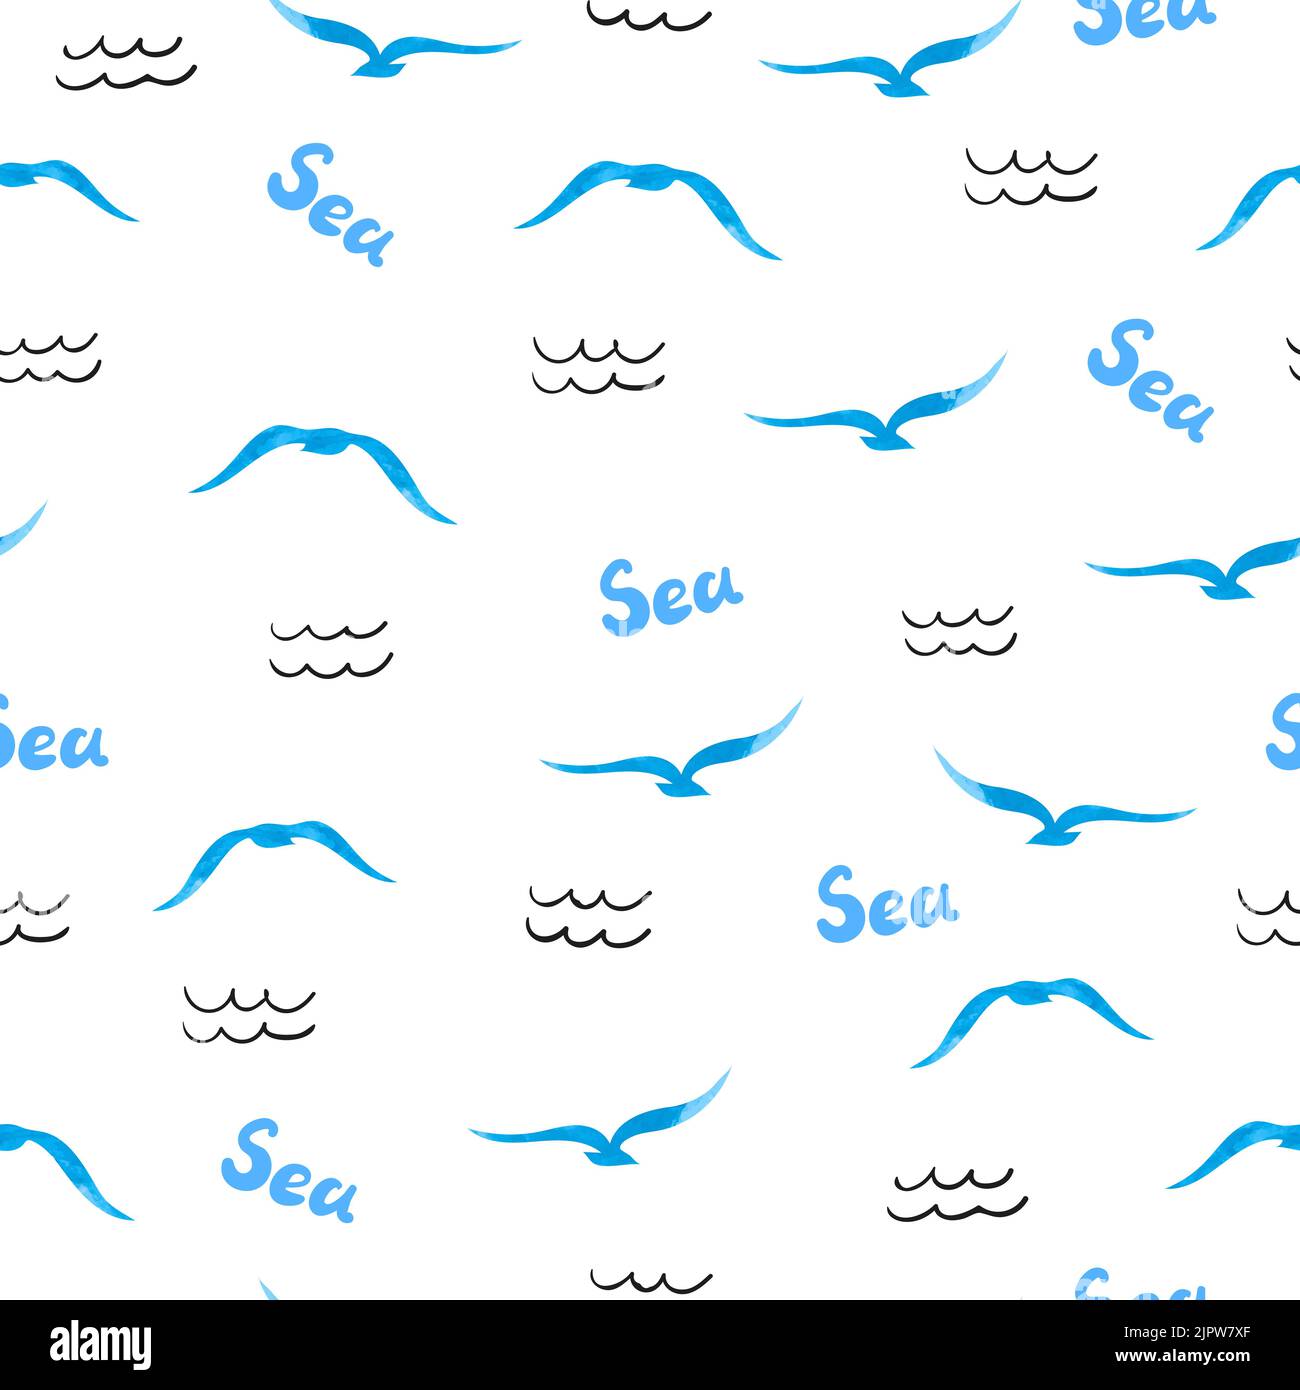 Sea seamless pattern. Watercolor seagulls silhouettes and doodle waves. Vector sea background Stock Vector